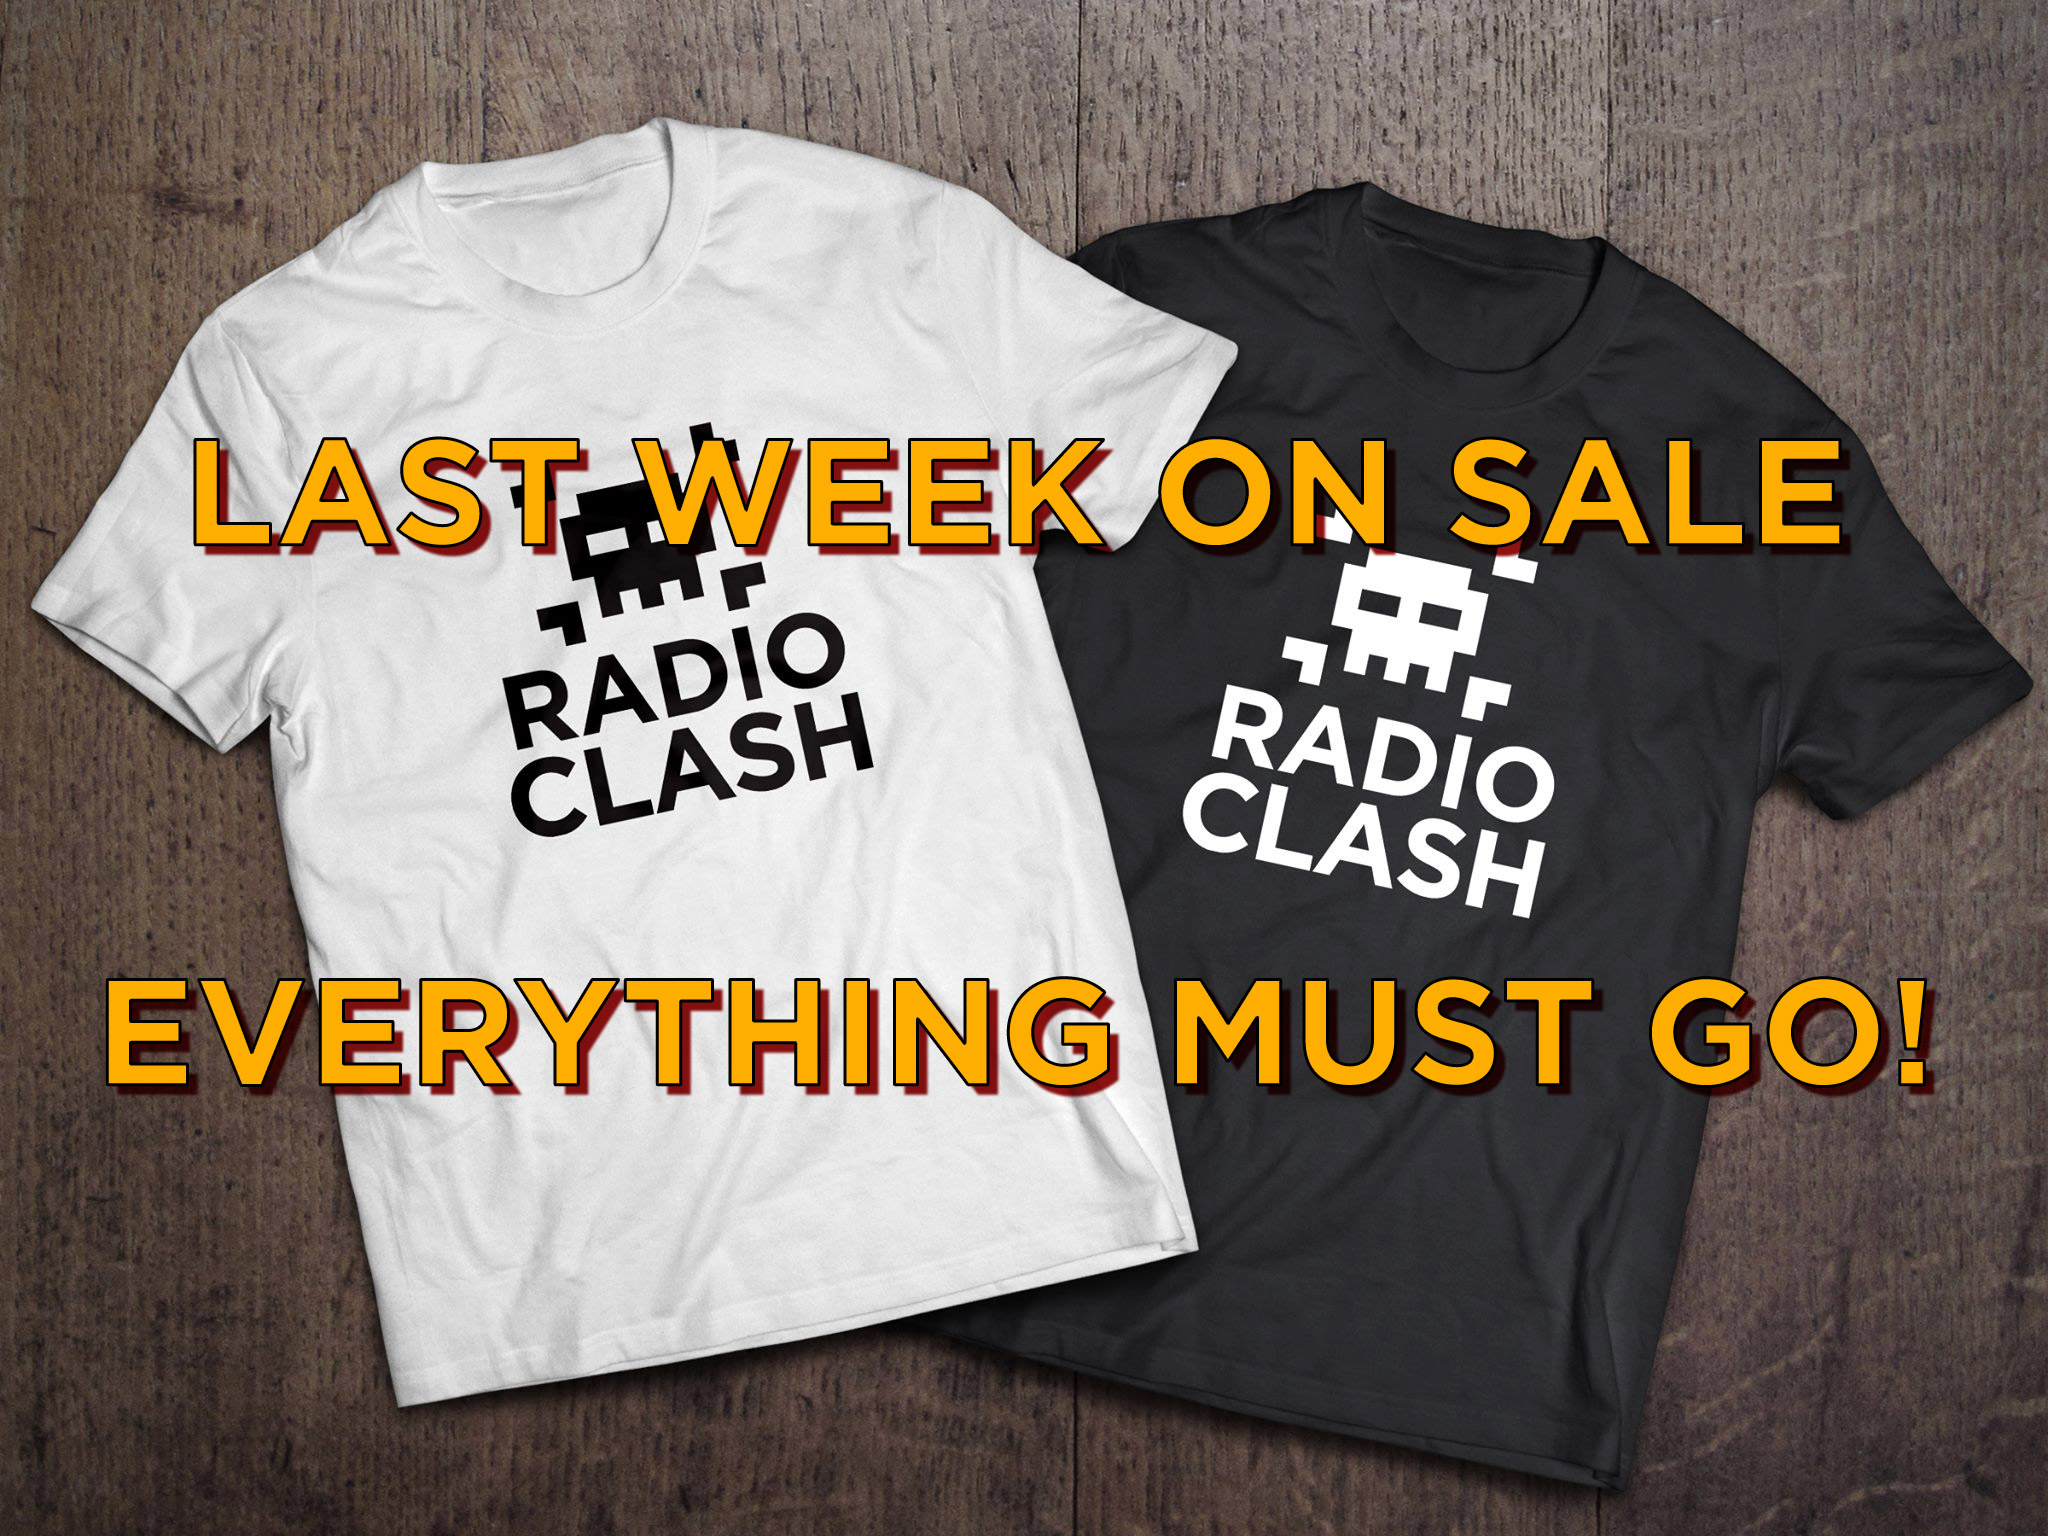 radioclash tshirts sale - Radio Clash Podcast Radio Clash The T-Shirt Is Here! Radio Clash Music Mashup Podcast brings you the best in eclectic tunes, mashups and remixes from around the world. Since 2004, we've been bringing you the freshest and most innovative music from a diverse range of genres and cultures. Join us on our musical journey as we explore the sounds of yesterday, today, and tomorrow. Discover new music and be inspired by the mashup of musical styles that only Radio Clash can provide. Subscribe now to elevate your musical experience!